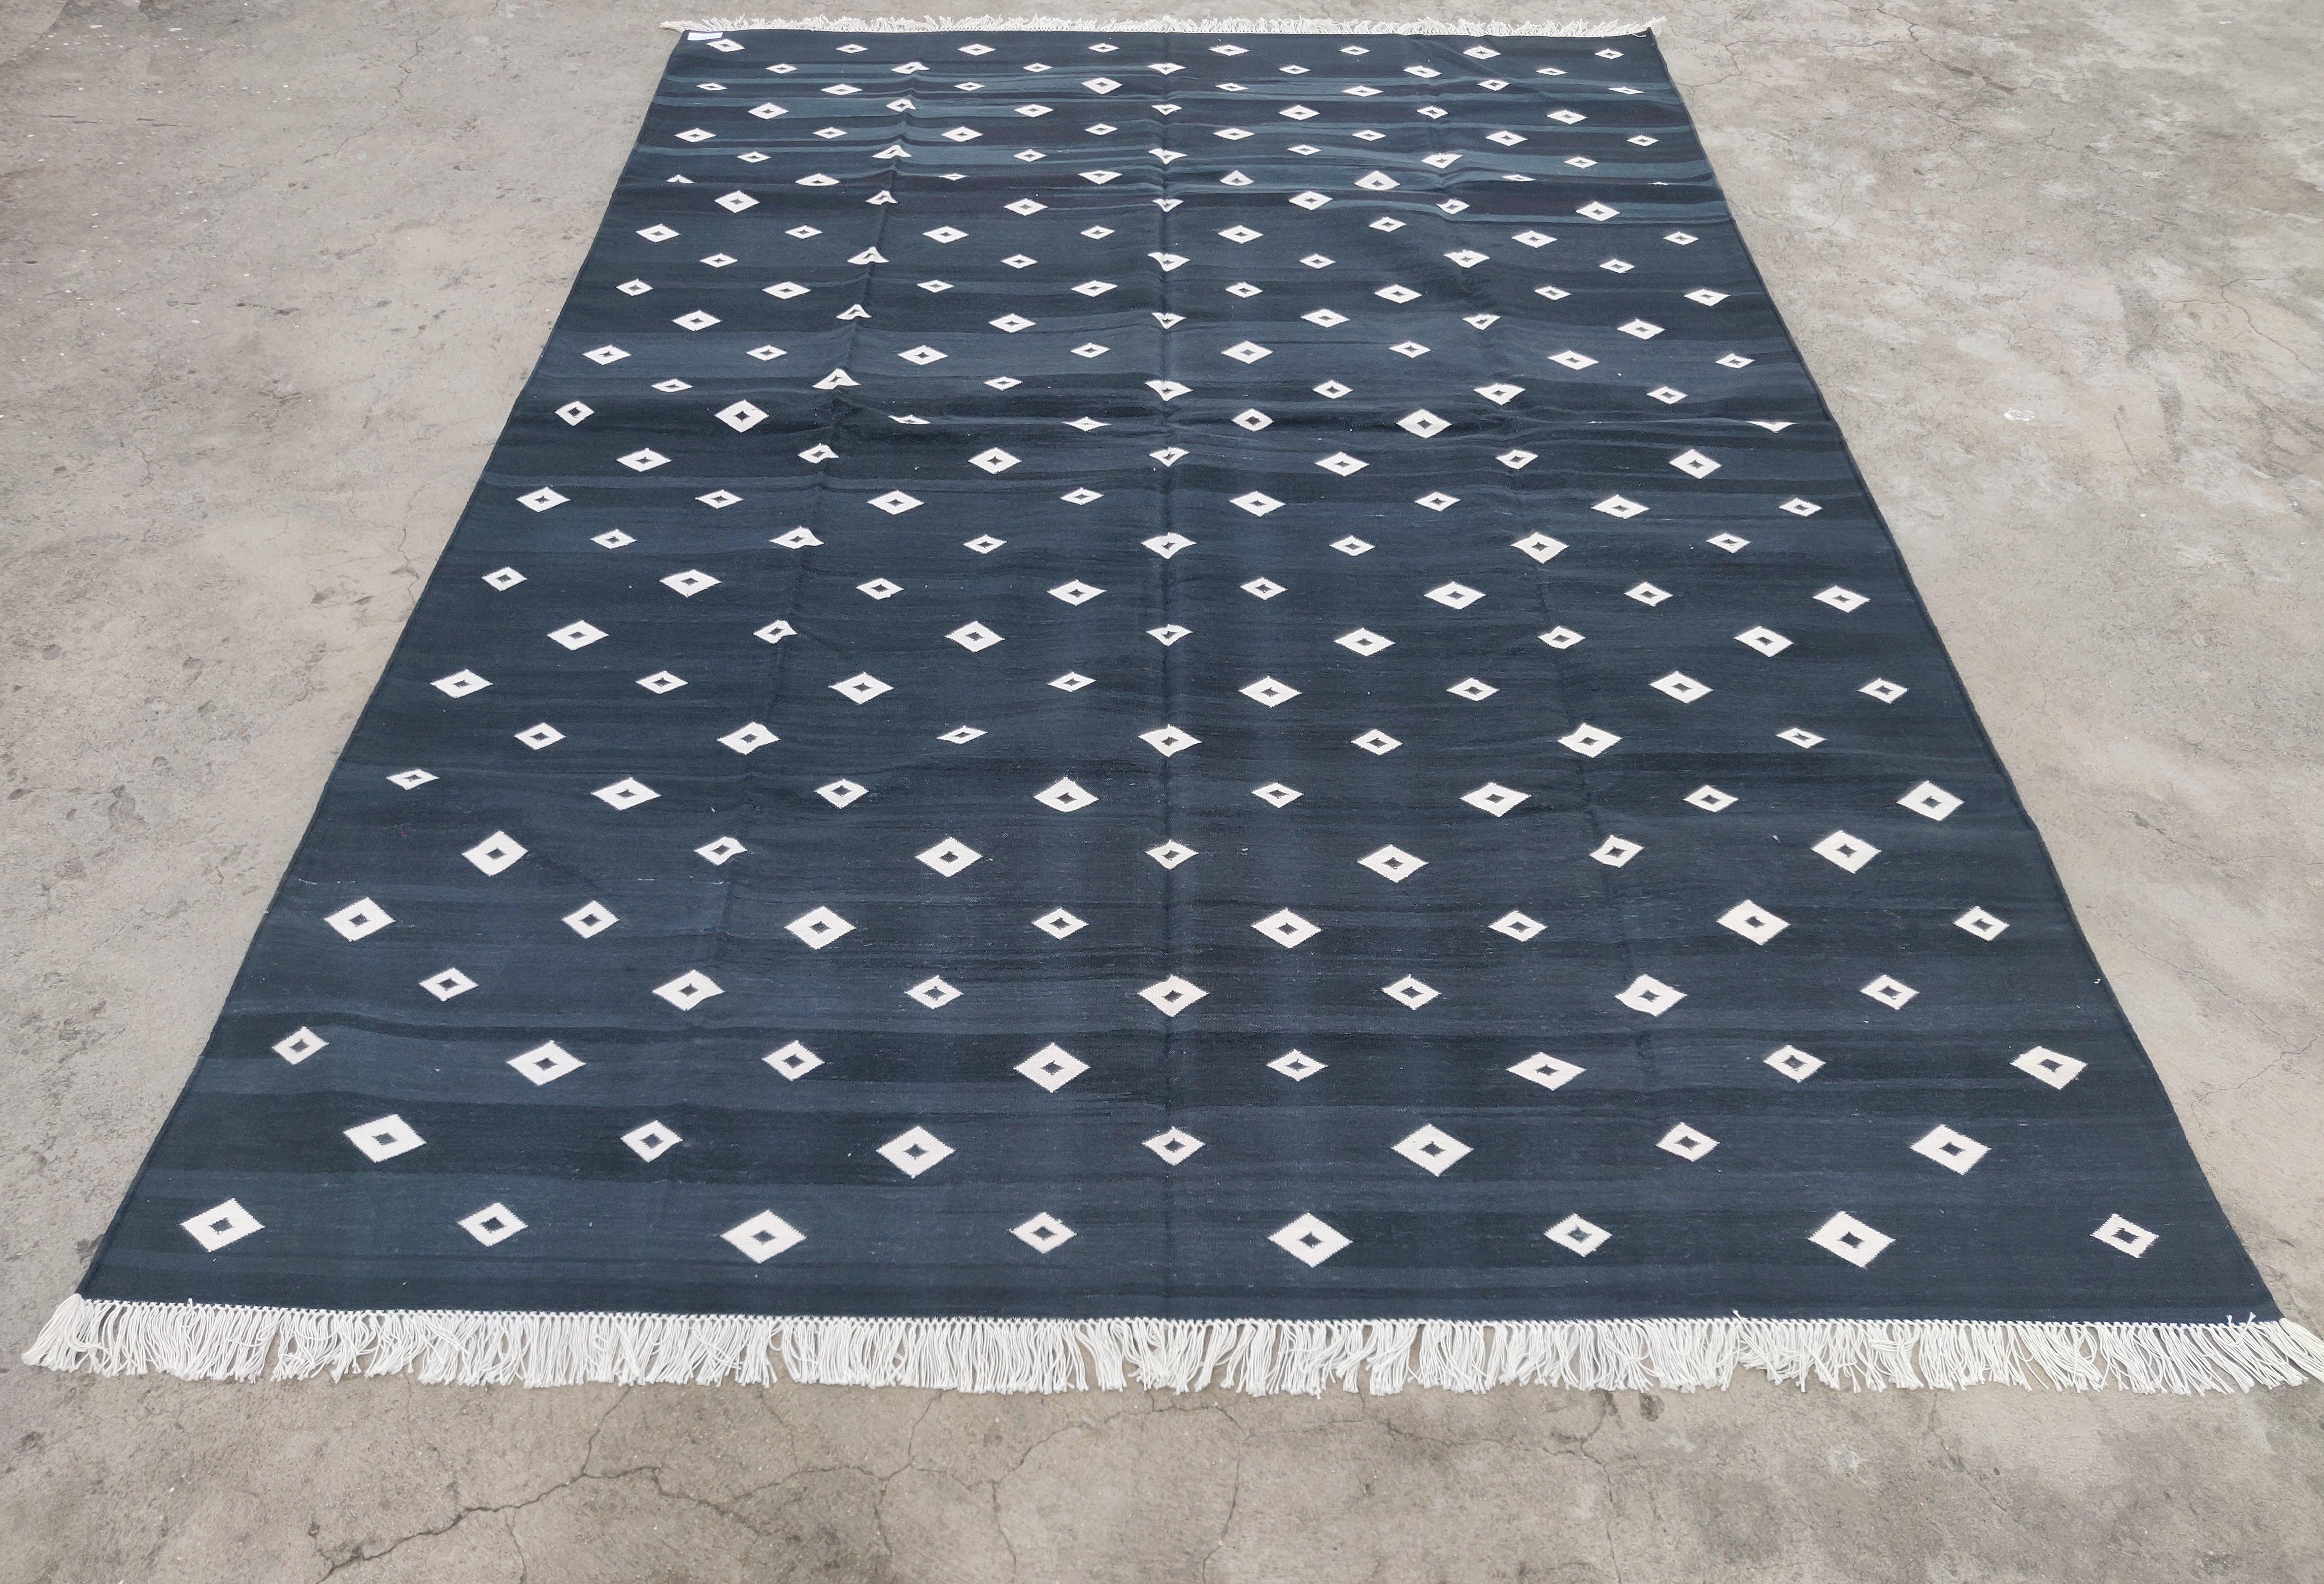 Handmade Cotton Area Flat Weave Rug, 6x9 Black And White Diamond Indian Dhurrie In New Condition For Sale In Jaipur, IN